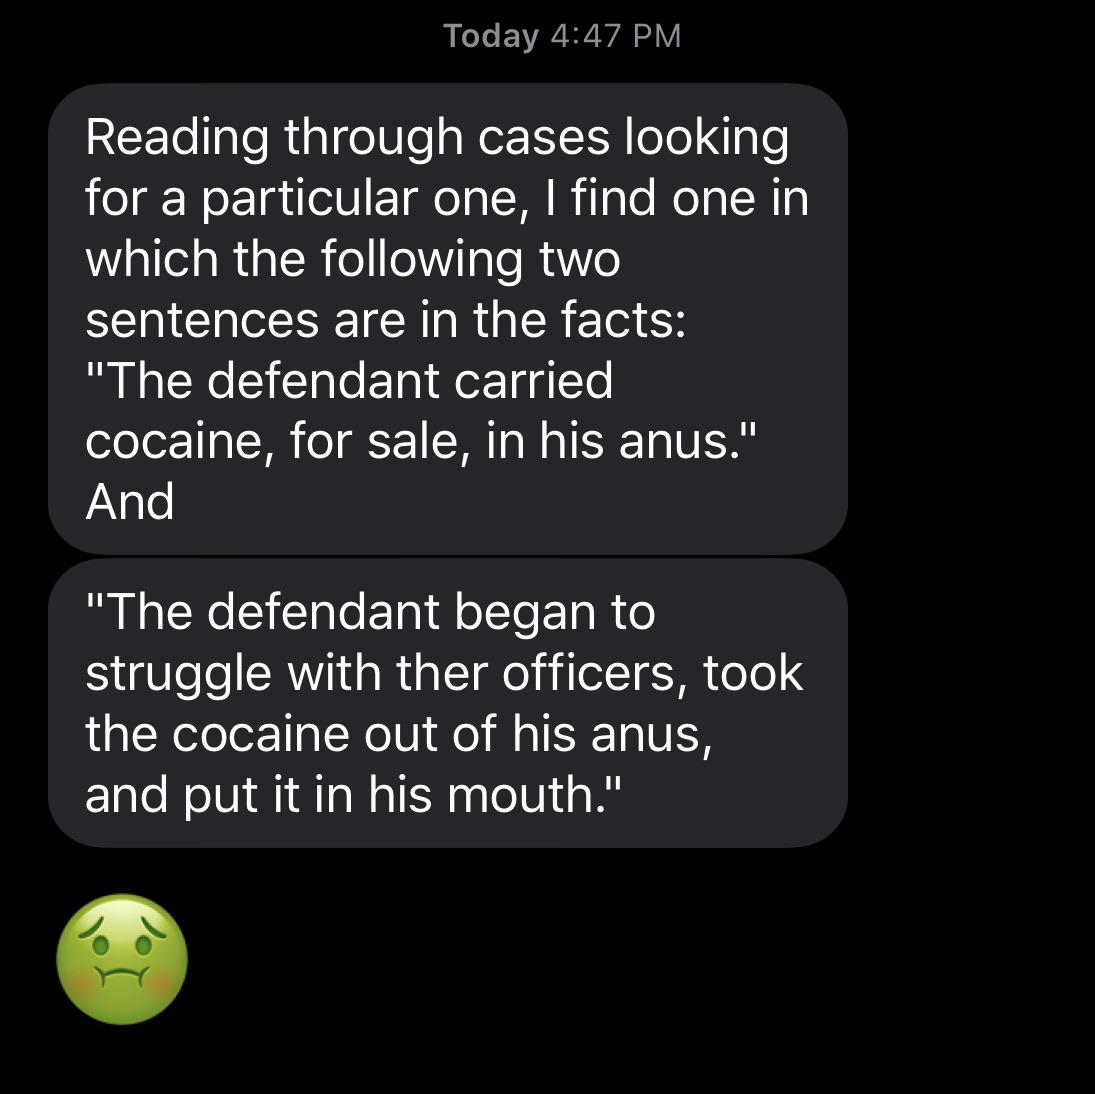 customer focus - Today Reading through cases looking for a particular one, I find one in which the ing two sentences are in the facts "The defendant carried cocaine, for sale, in his anus." And "The defendant began to struggle with ther officers, took the